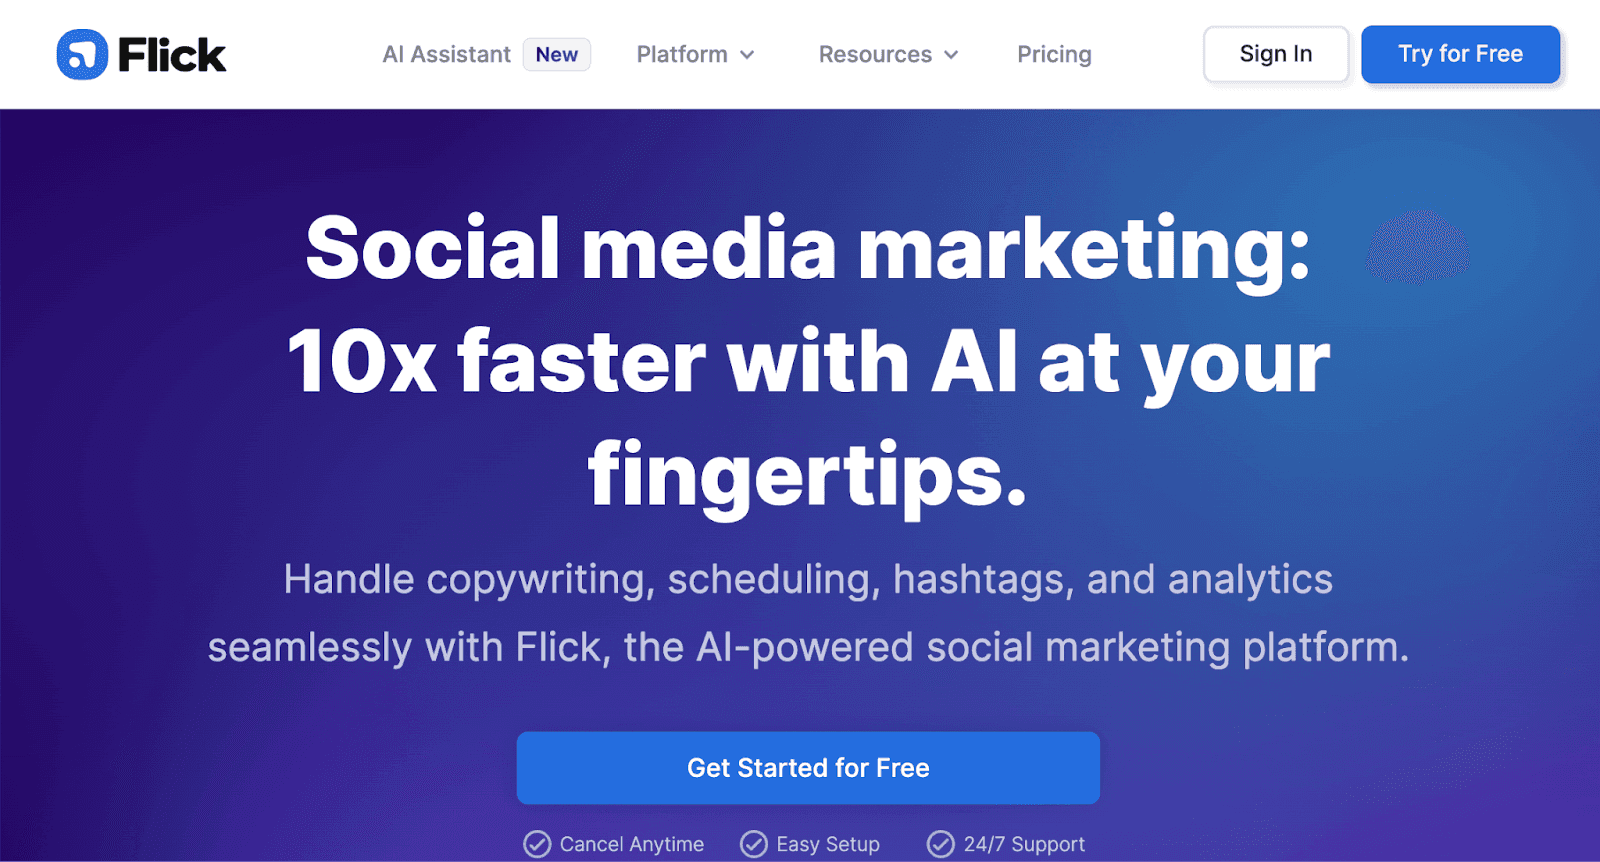 Flick webpage - Social media marketing: 10x faster with AI at your fingertips